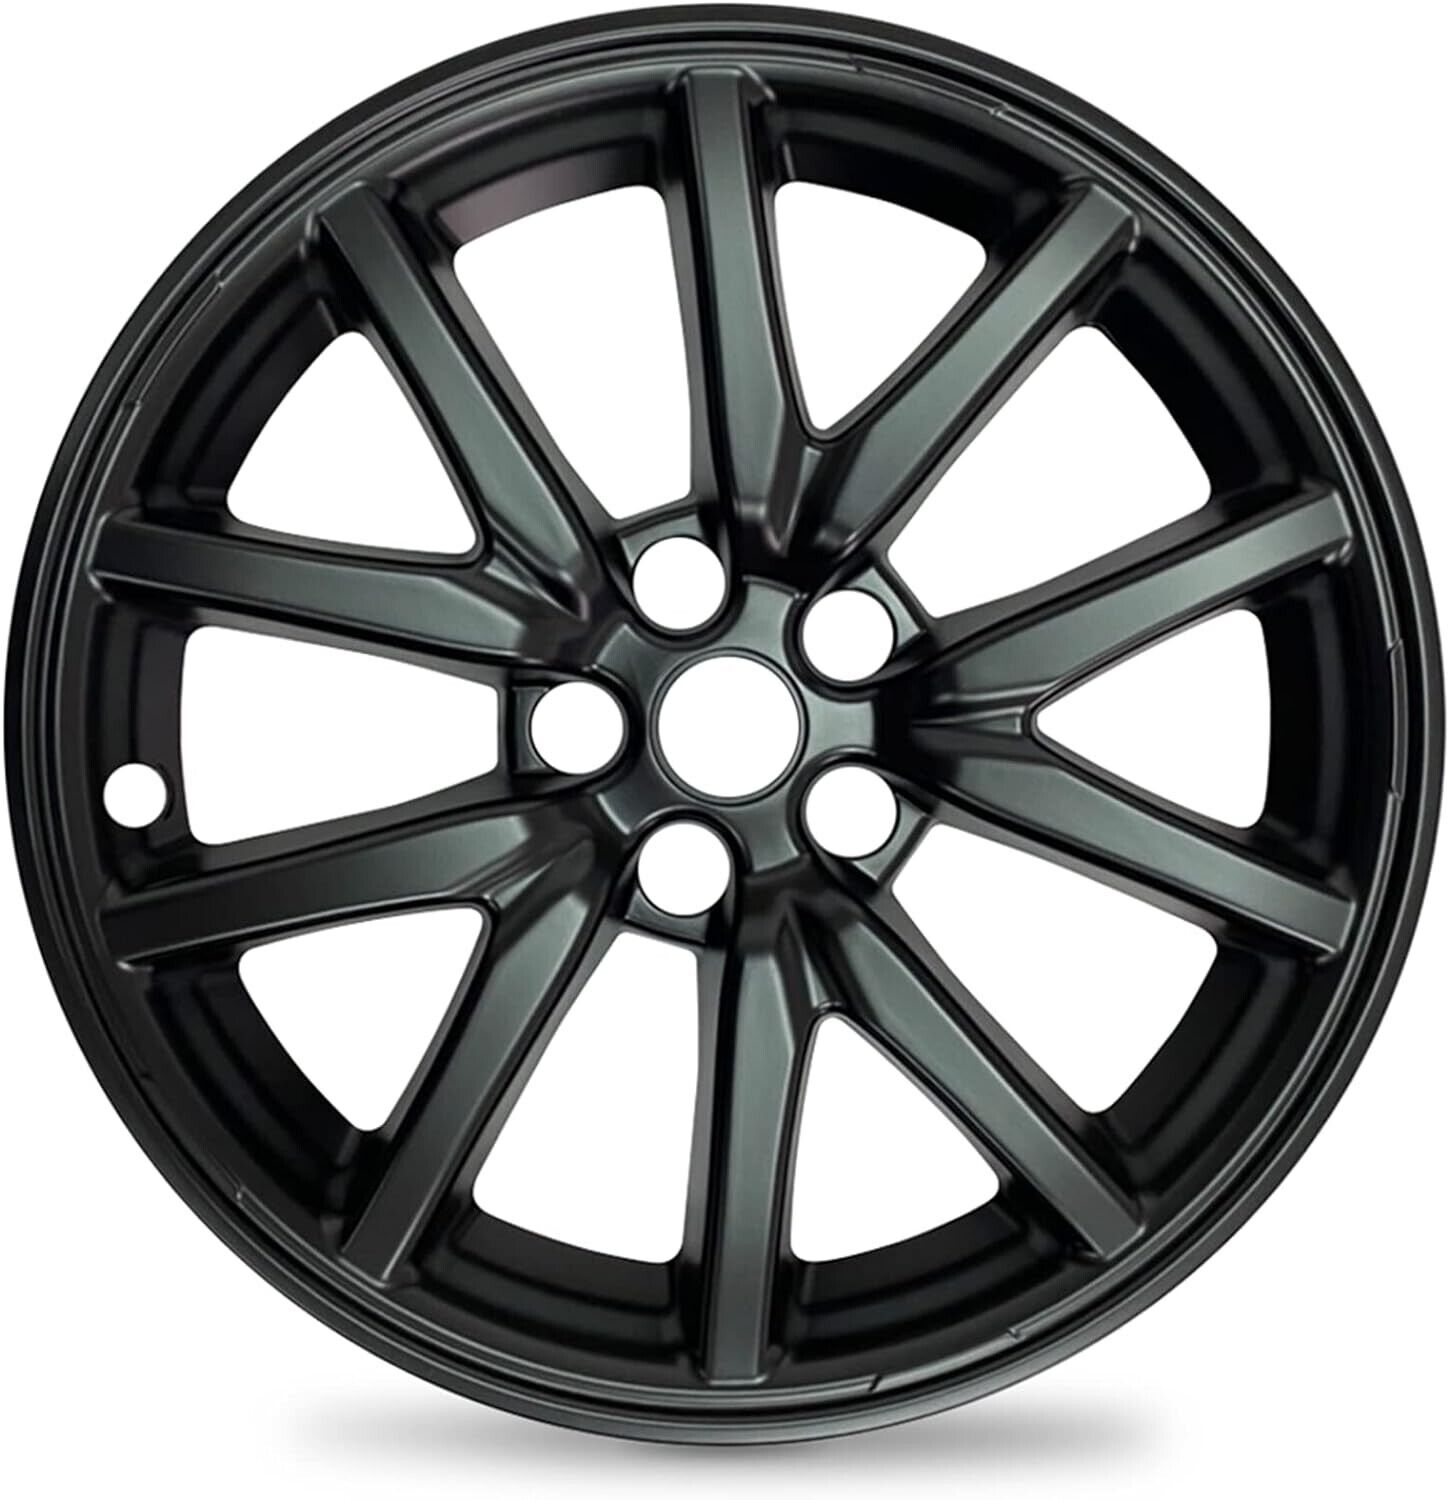 Mayde 18-Inch Wheel Covers fits 17-23 Tesla Model 3 Rims, Replacement Hub Caps